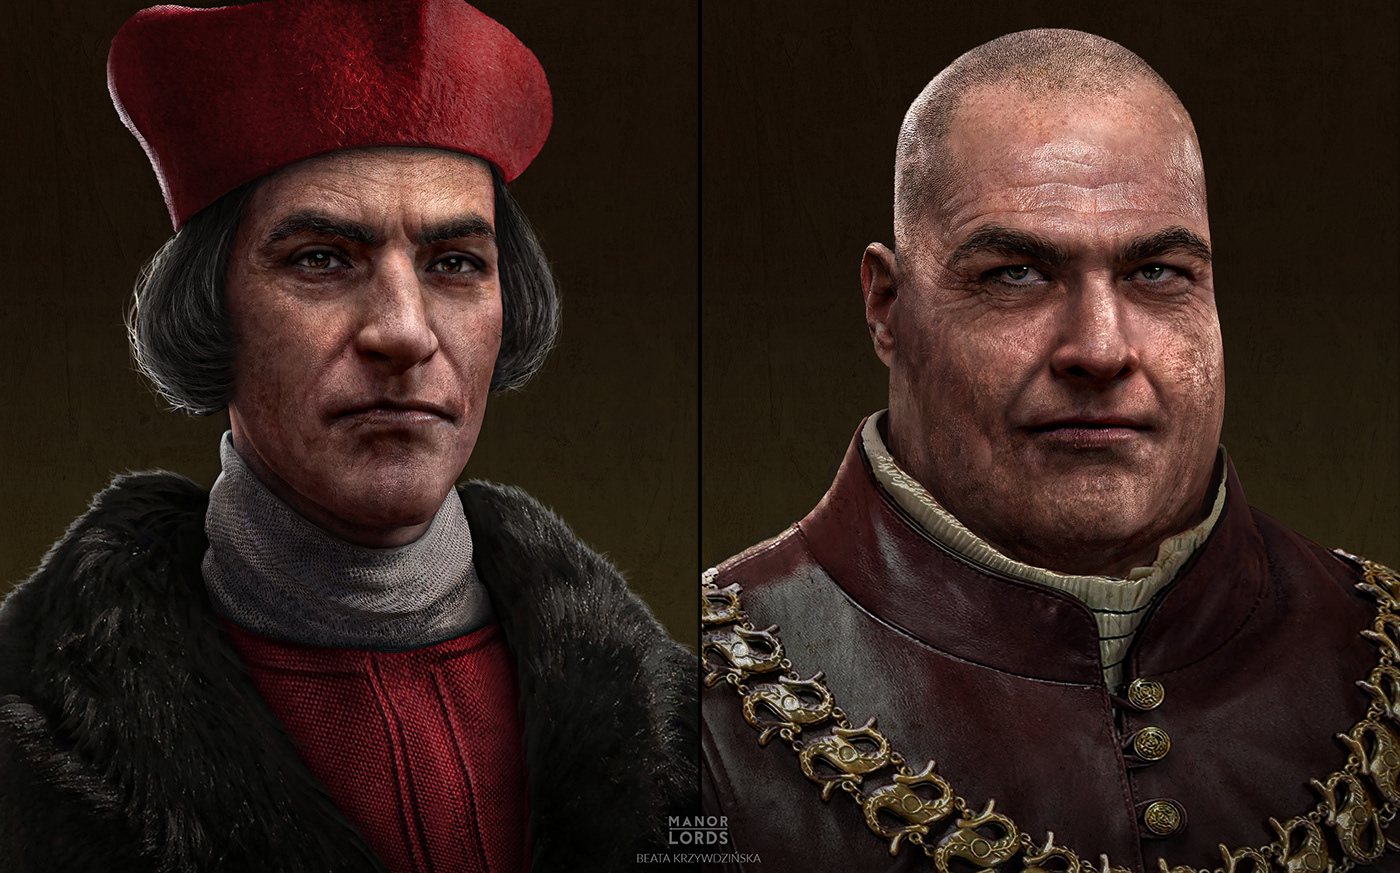 avatars characterdesign characters conceptart digitalpainting game manorlords medieval painting   portraits